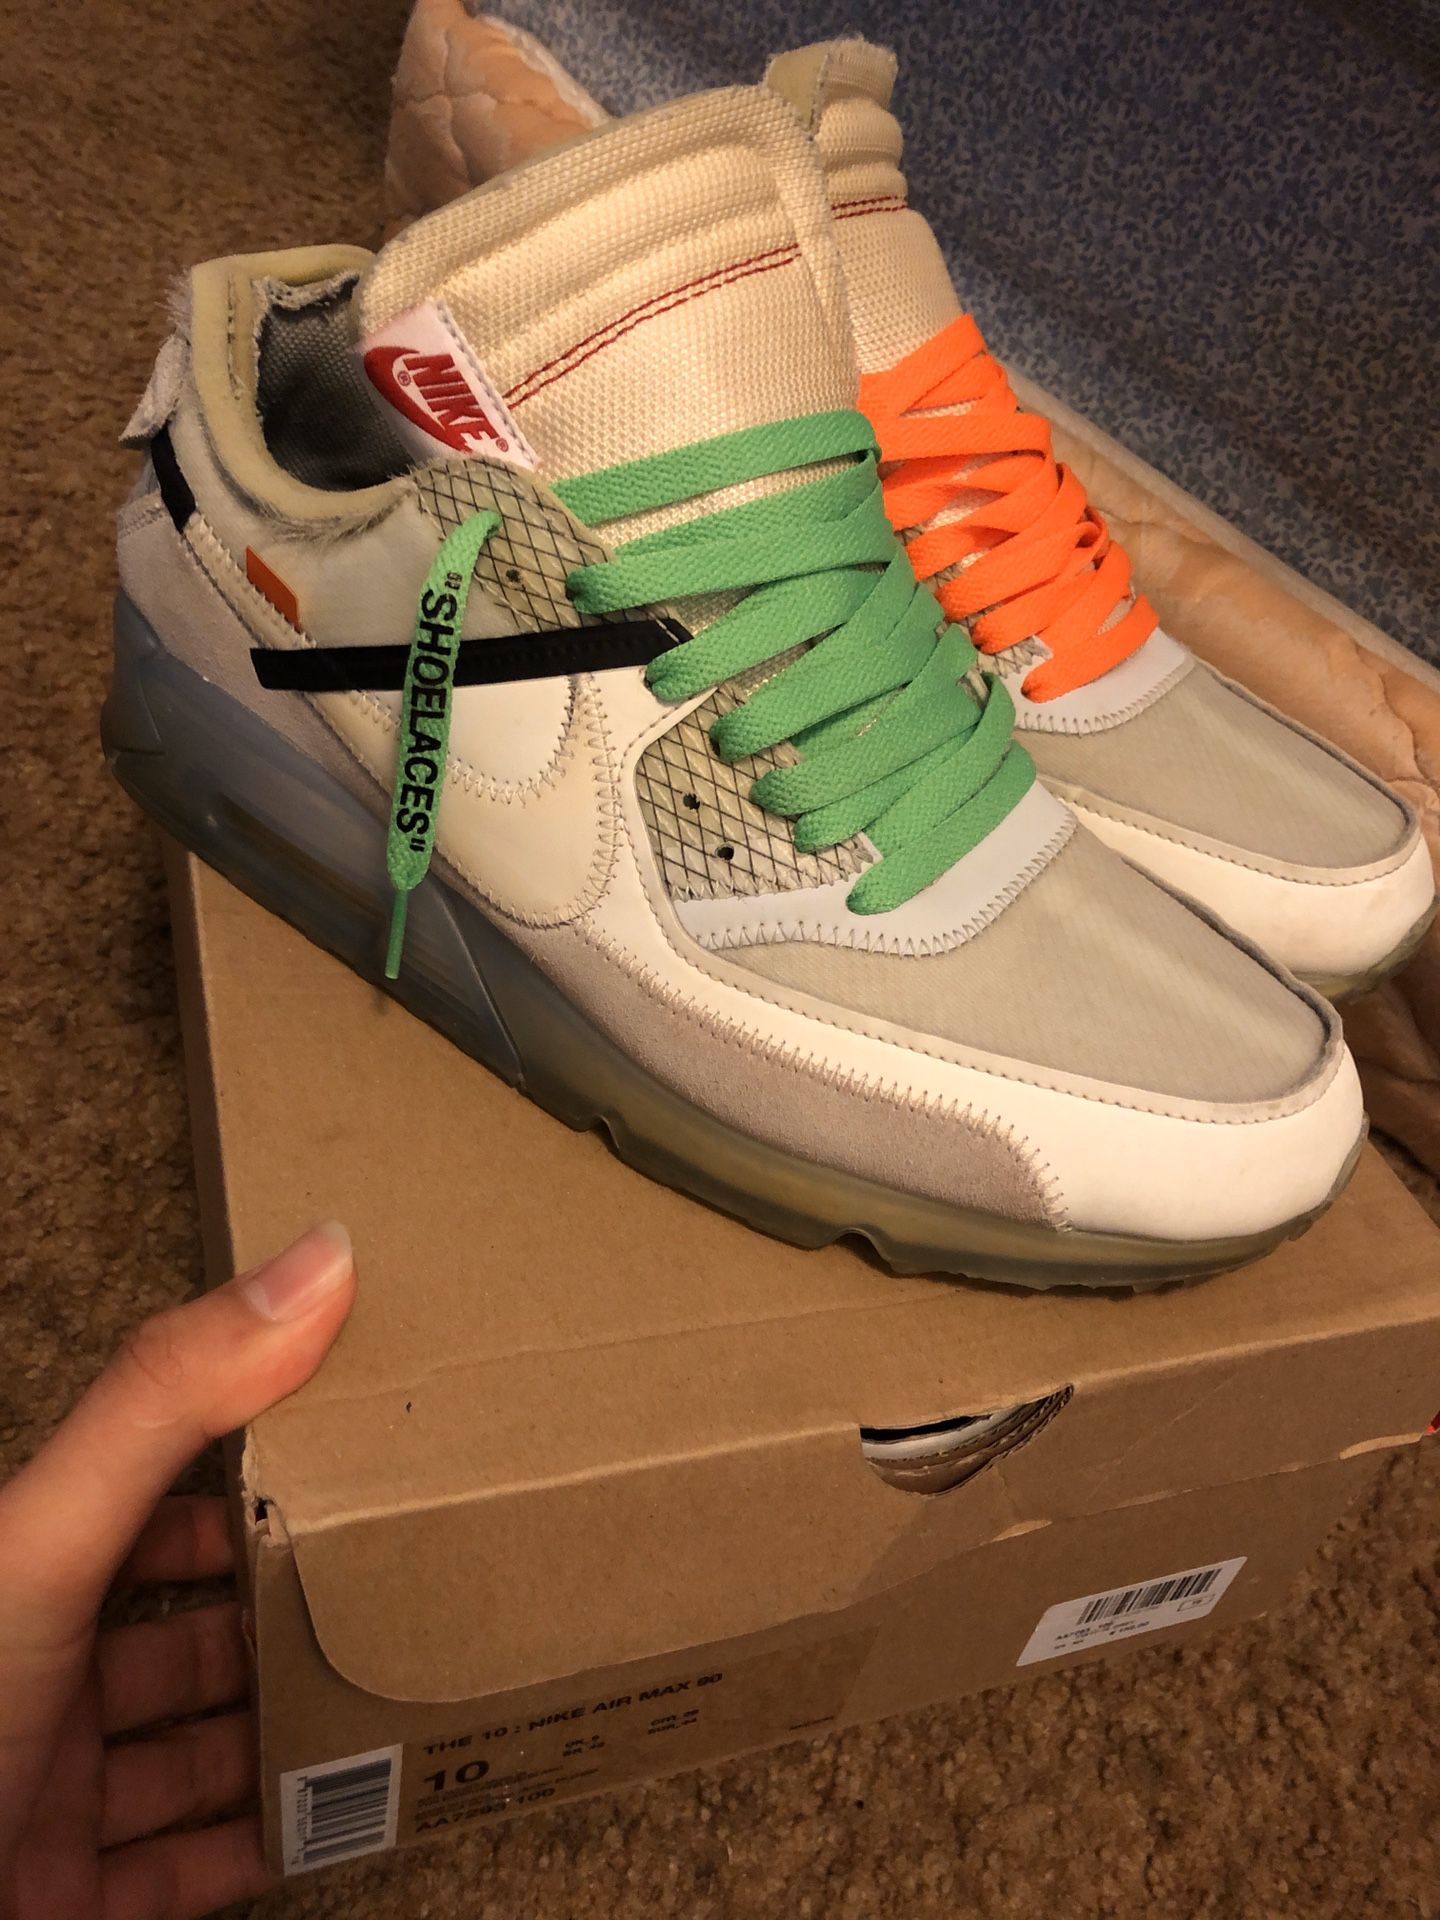 Off-White Nike Air Max 90 size 10